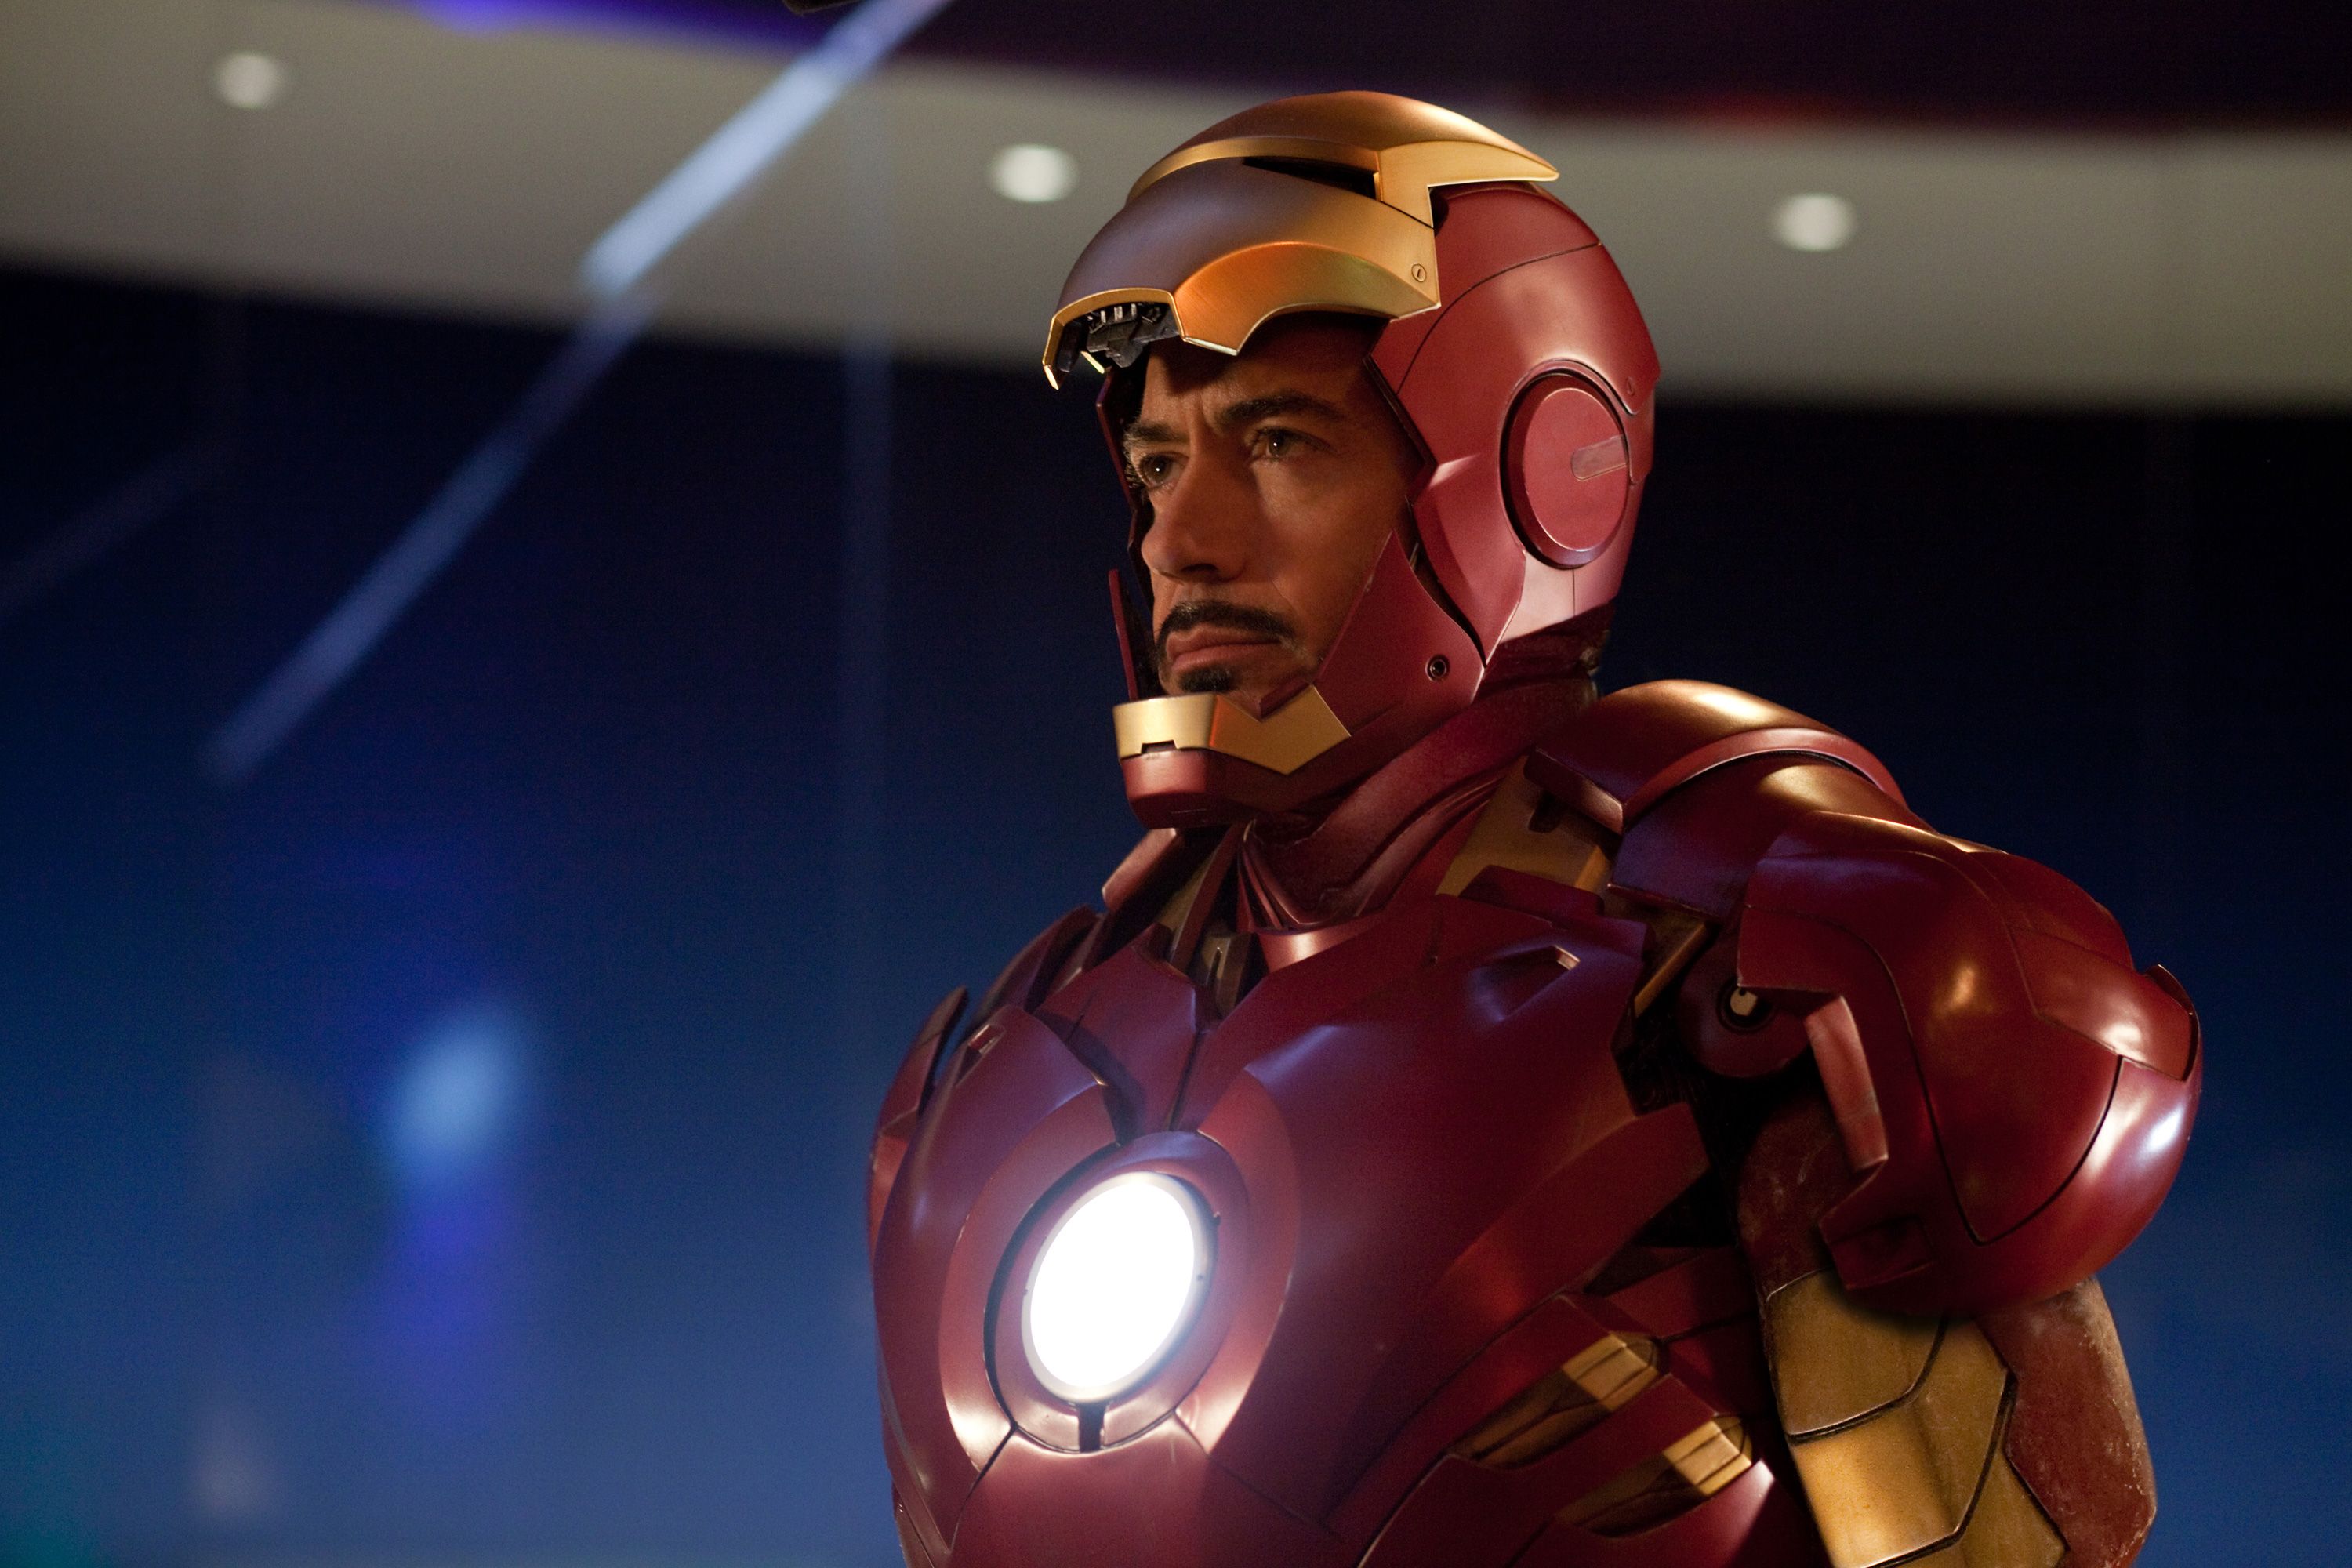 Marvel's Next Movies Include THOR 2, IRON MAN 3, ANTMAN and More